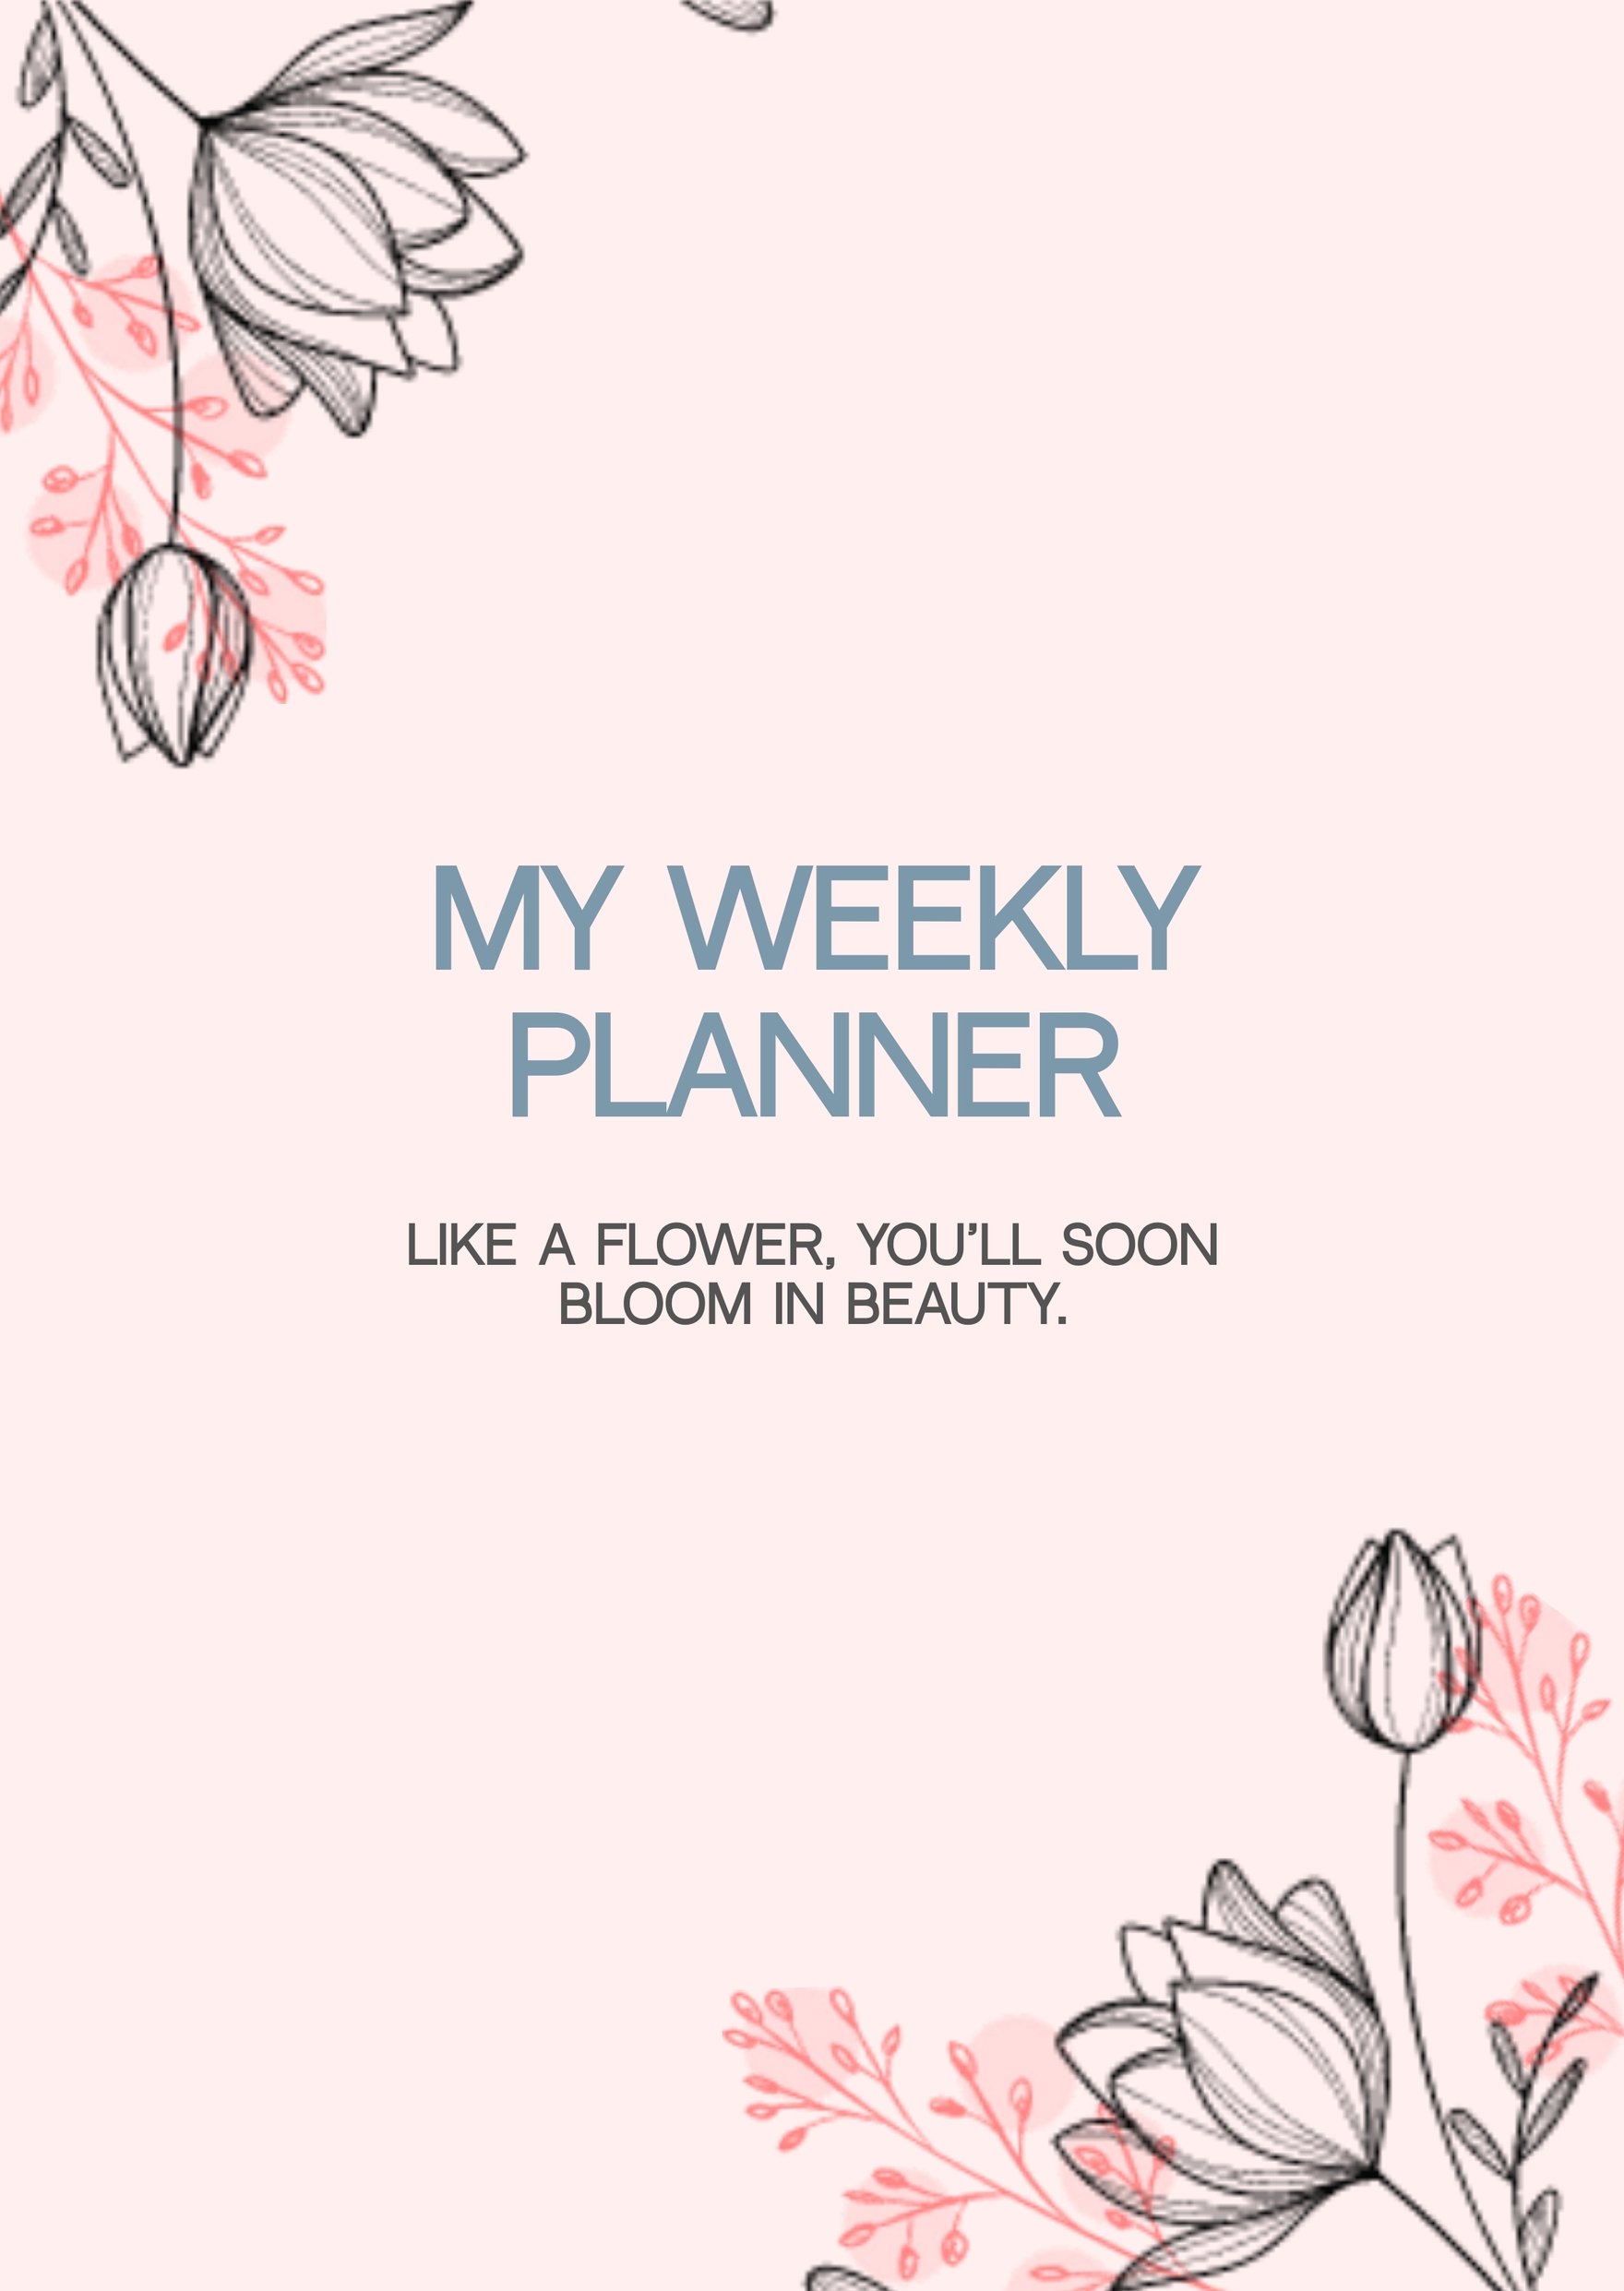 Floral Planner Cover Template